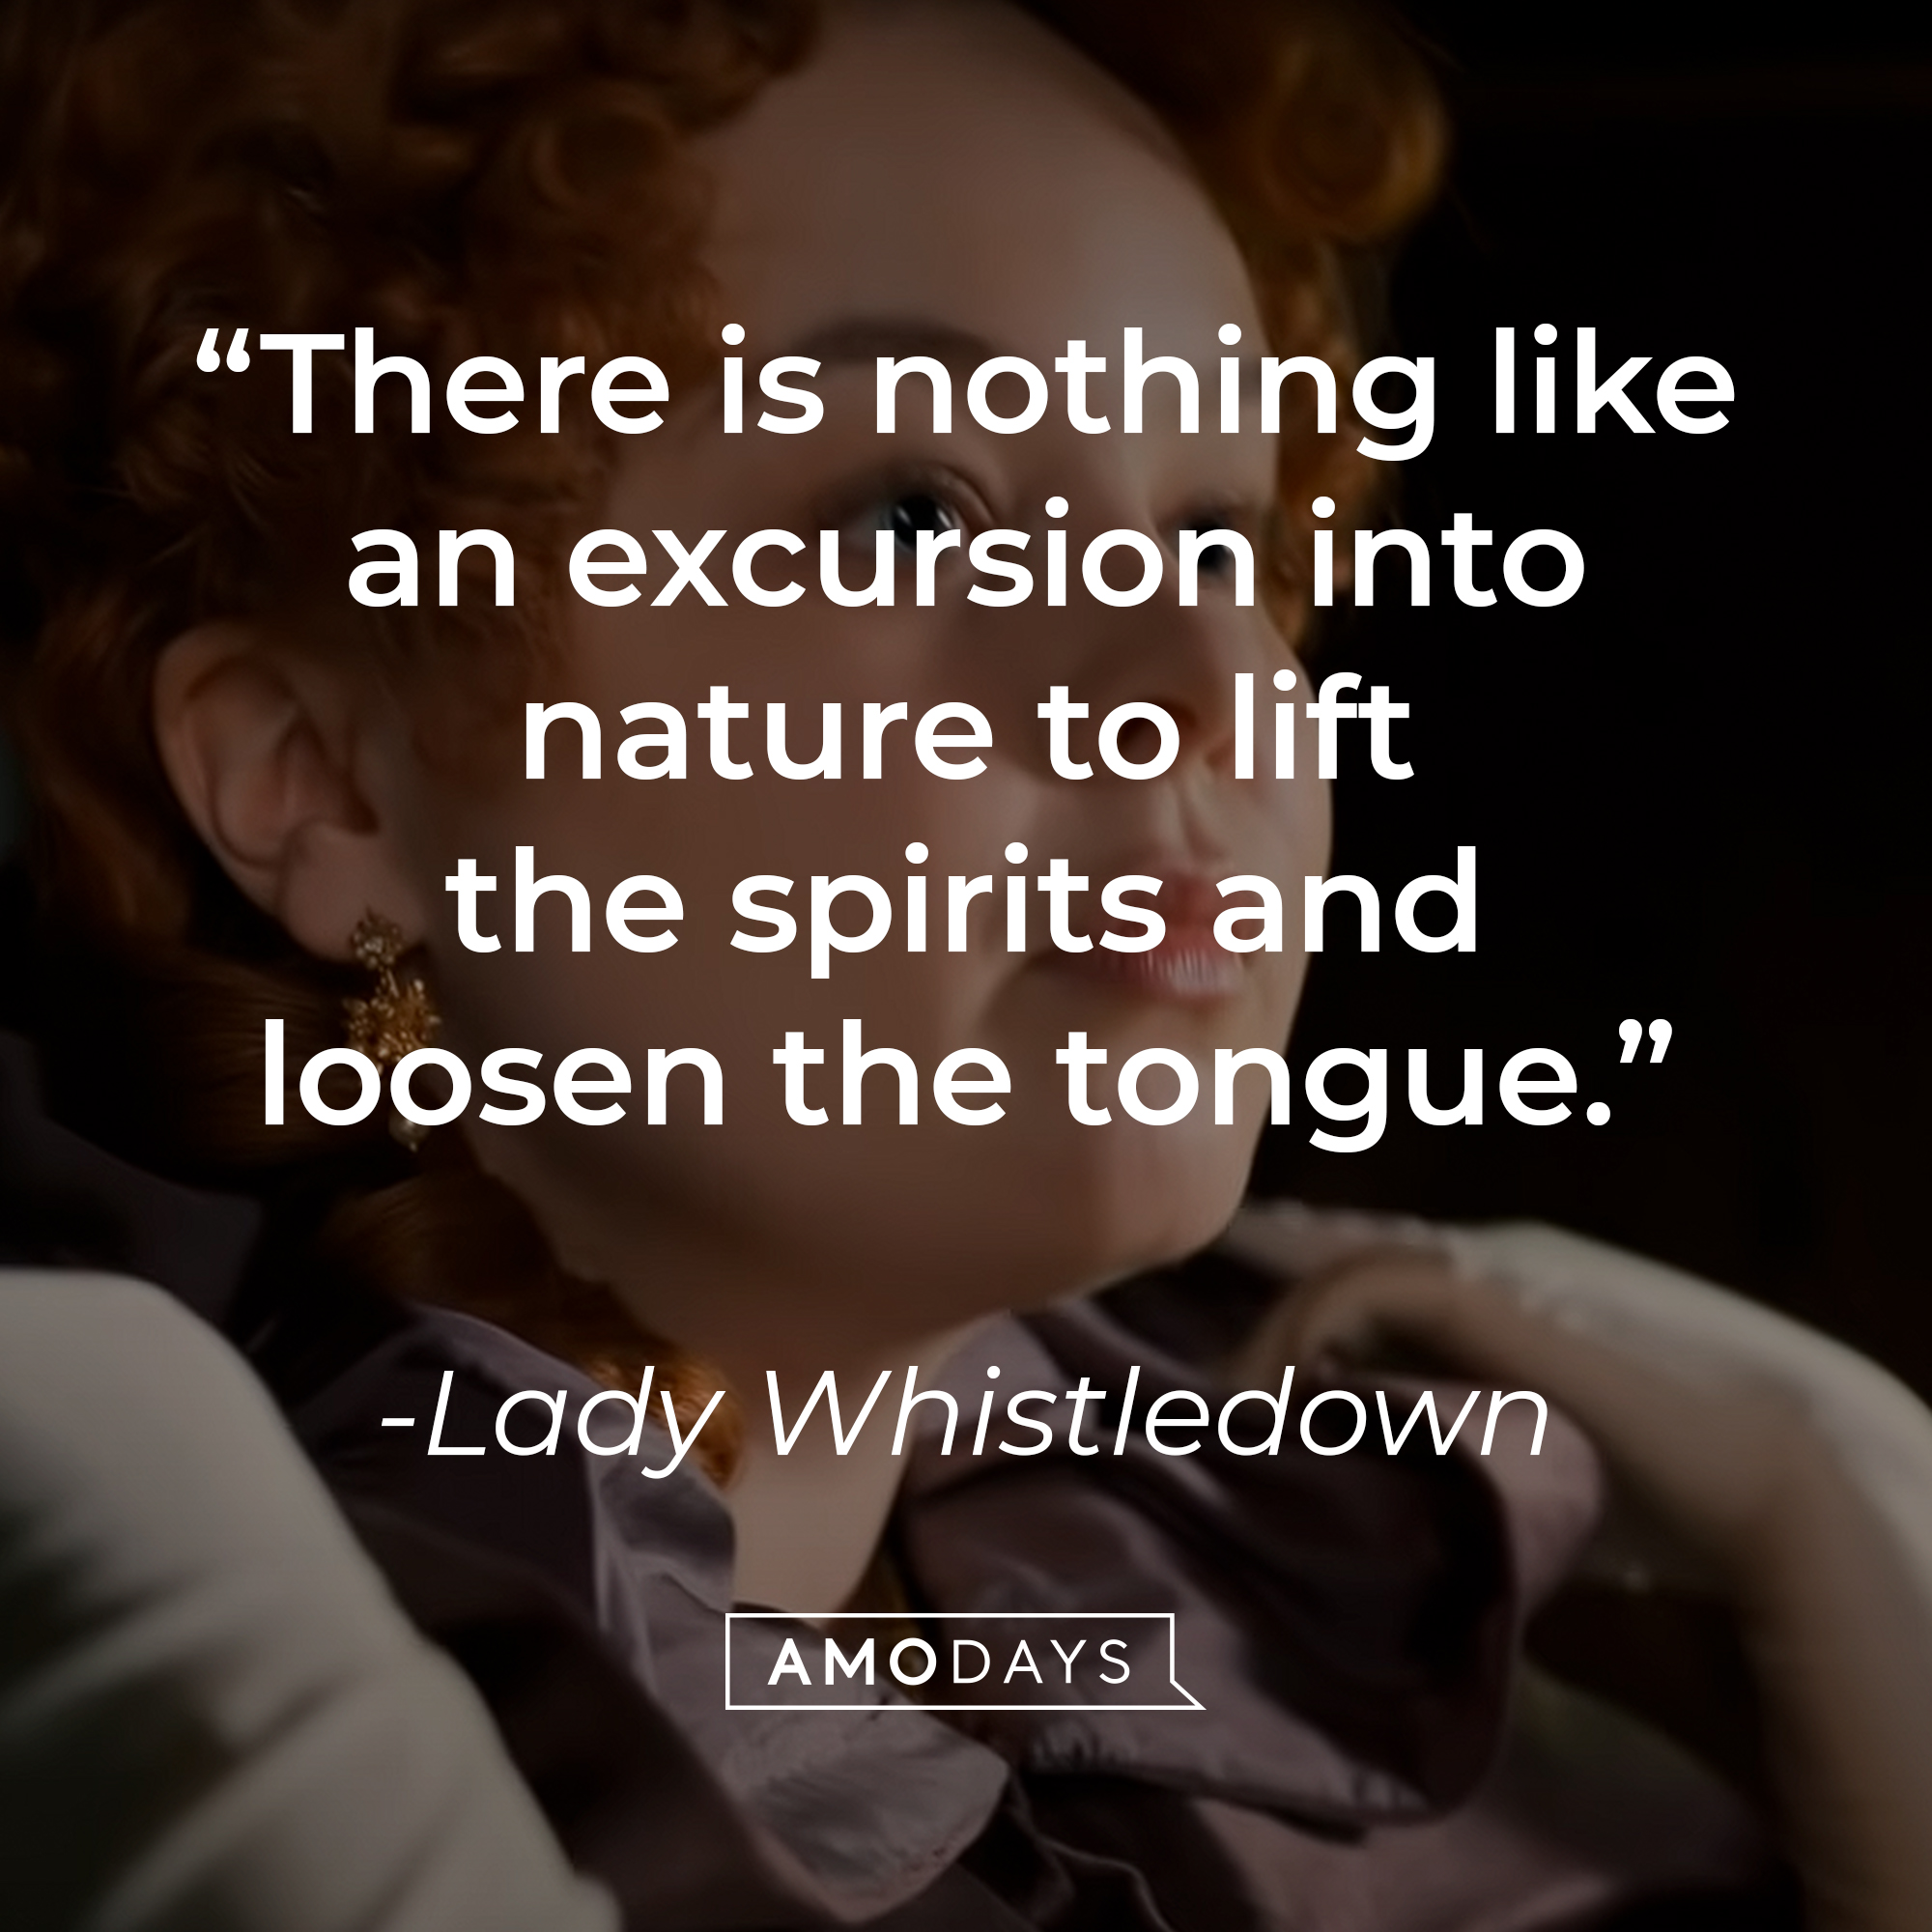 Lady Whistledown's quote: "There is nothing like an excursion into nature to lift the spirits and loosen the tongue." | Source: Youtube.com/Netflix